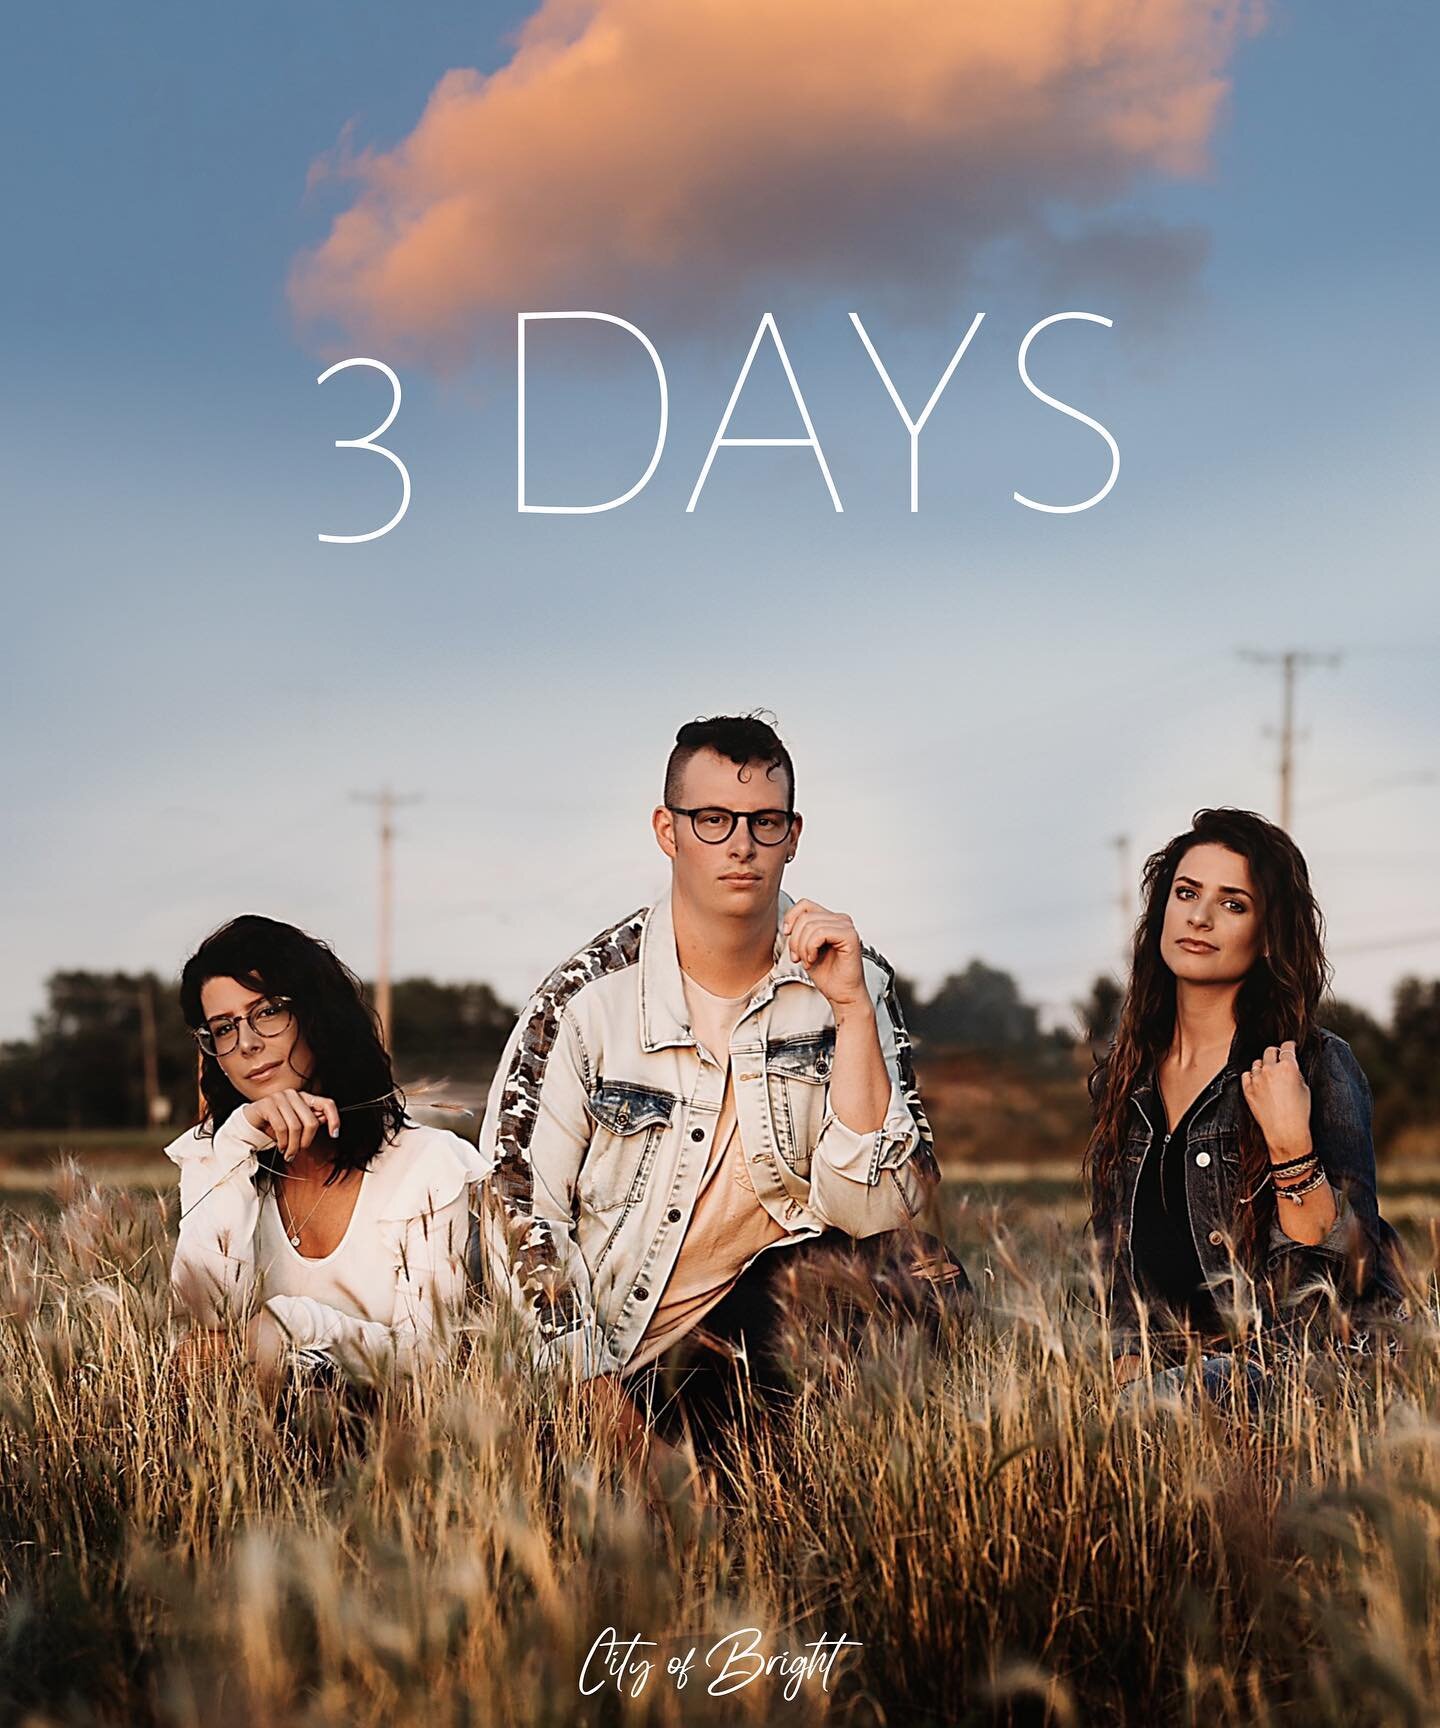 3 days until our new single releases! 💙 We will have a lot of fun things happening with the release. Keep your eyes out. 💙 10.1.20 #cityofbright #siblingband #newmusic